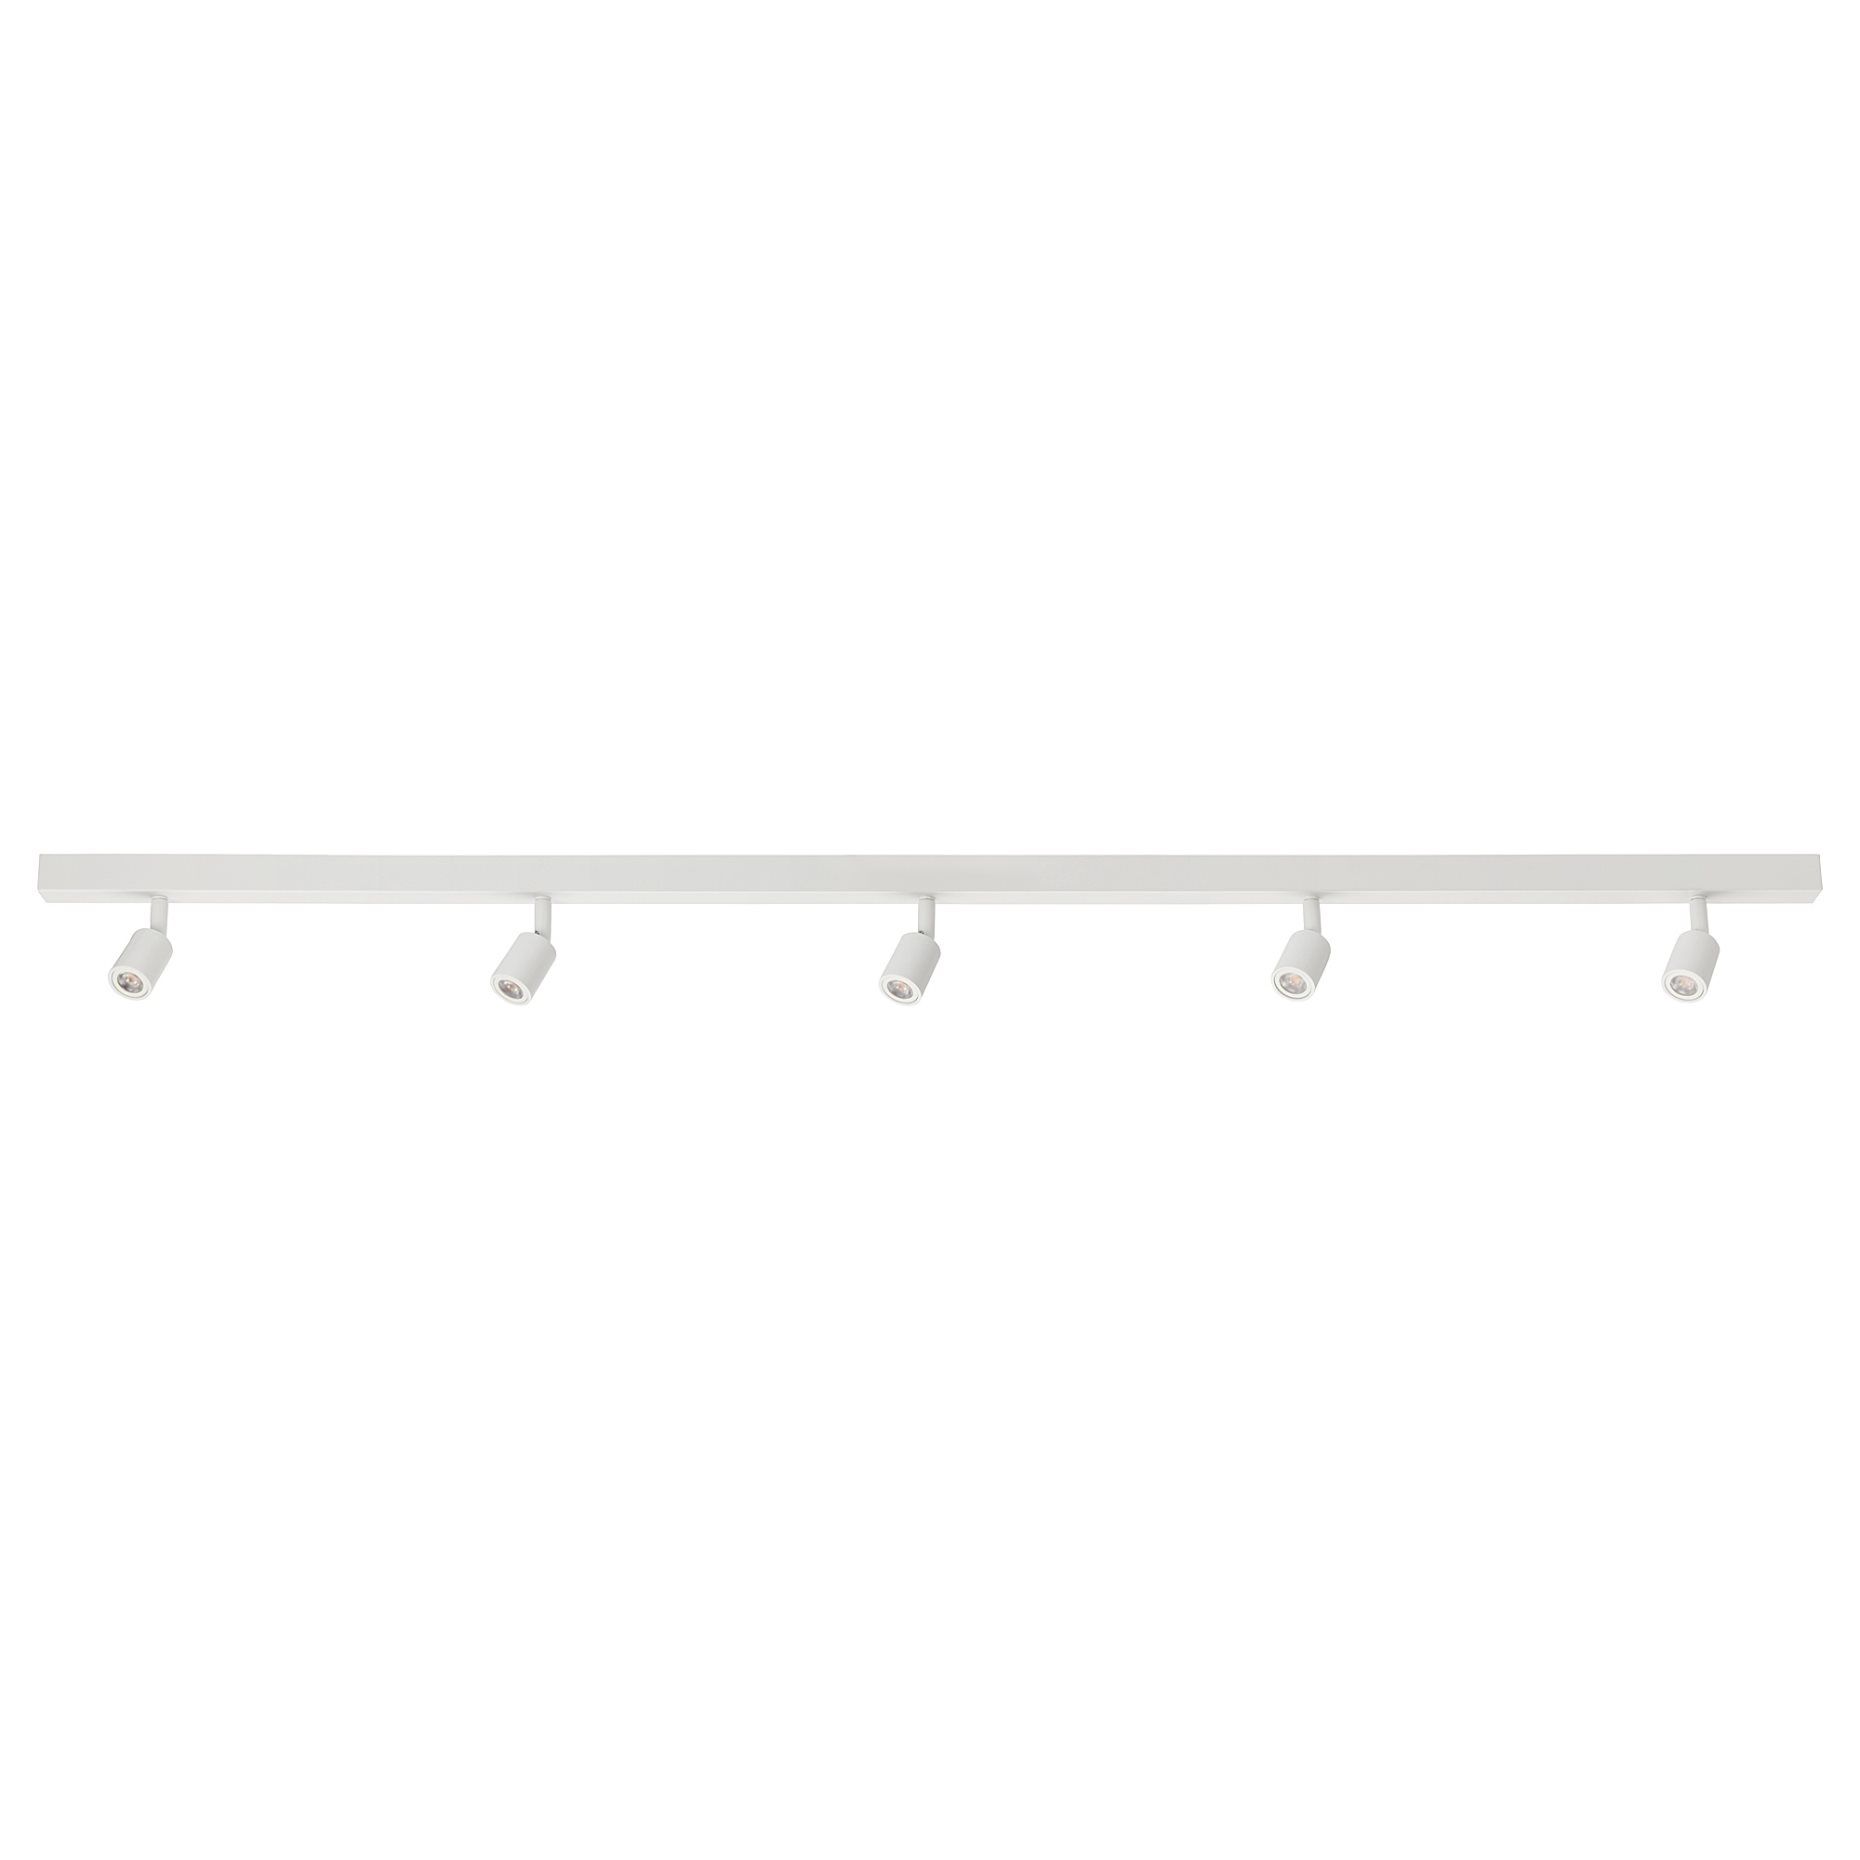 BÄVE, ceiling track with built-in LED light source, 5-spots, 805.272.39